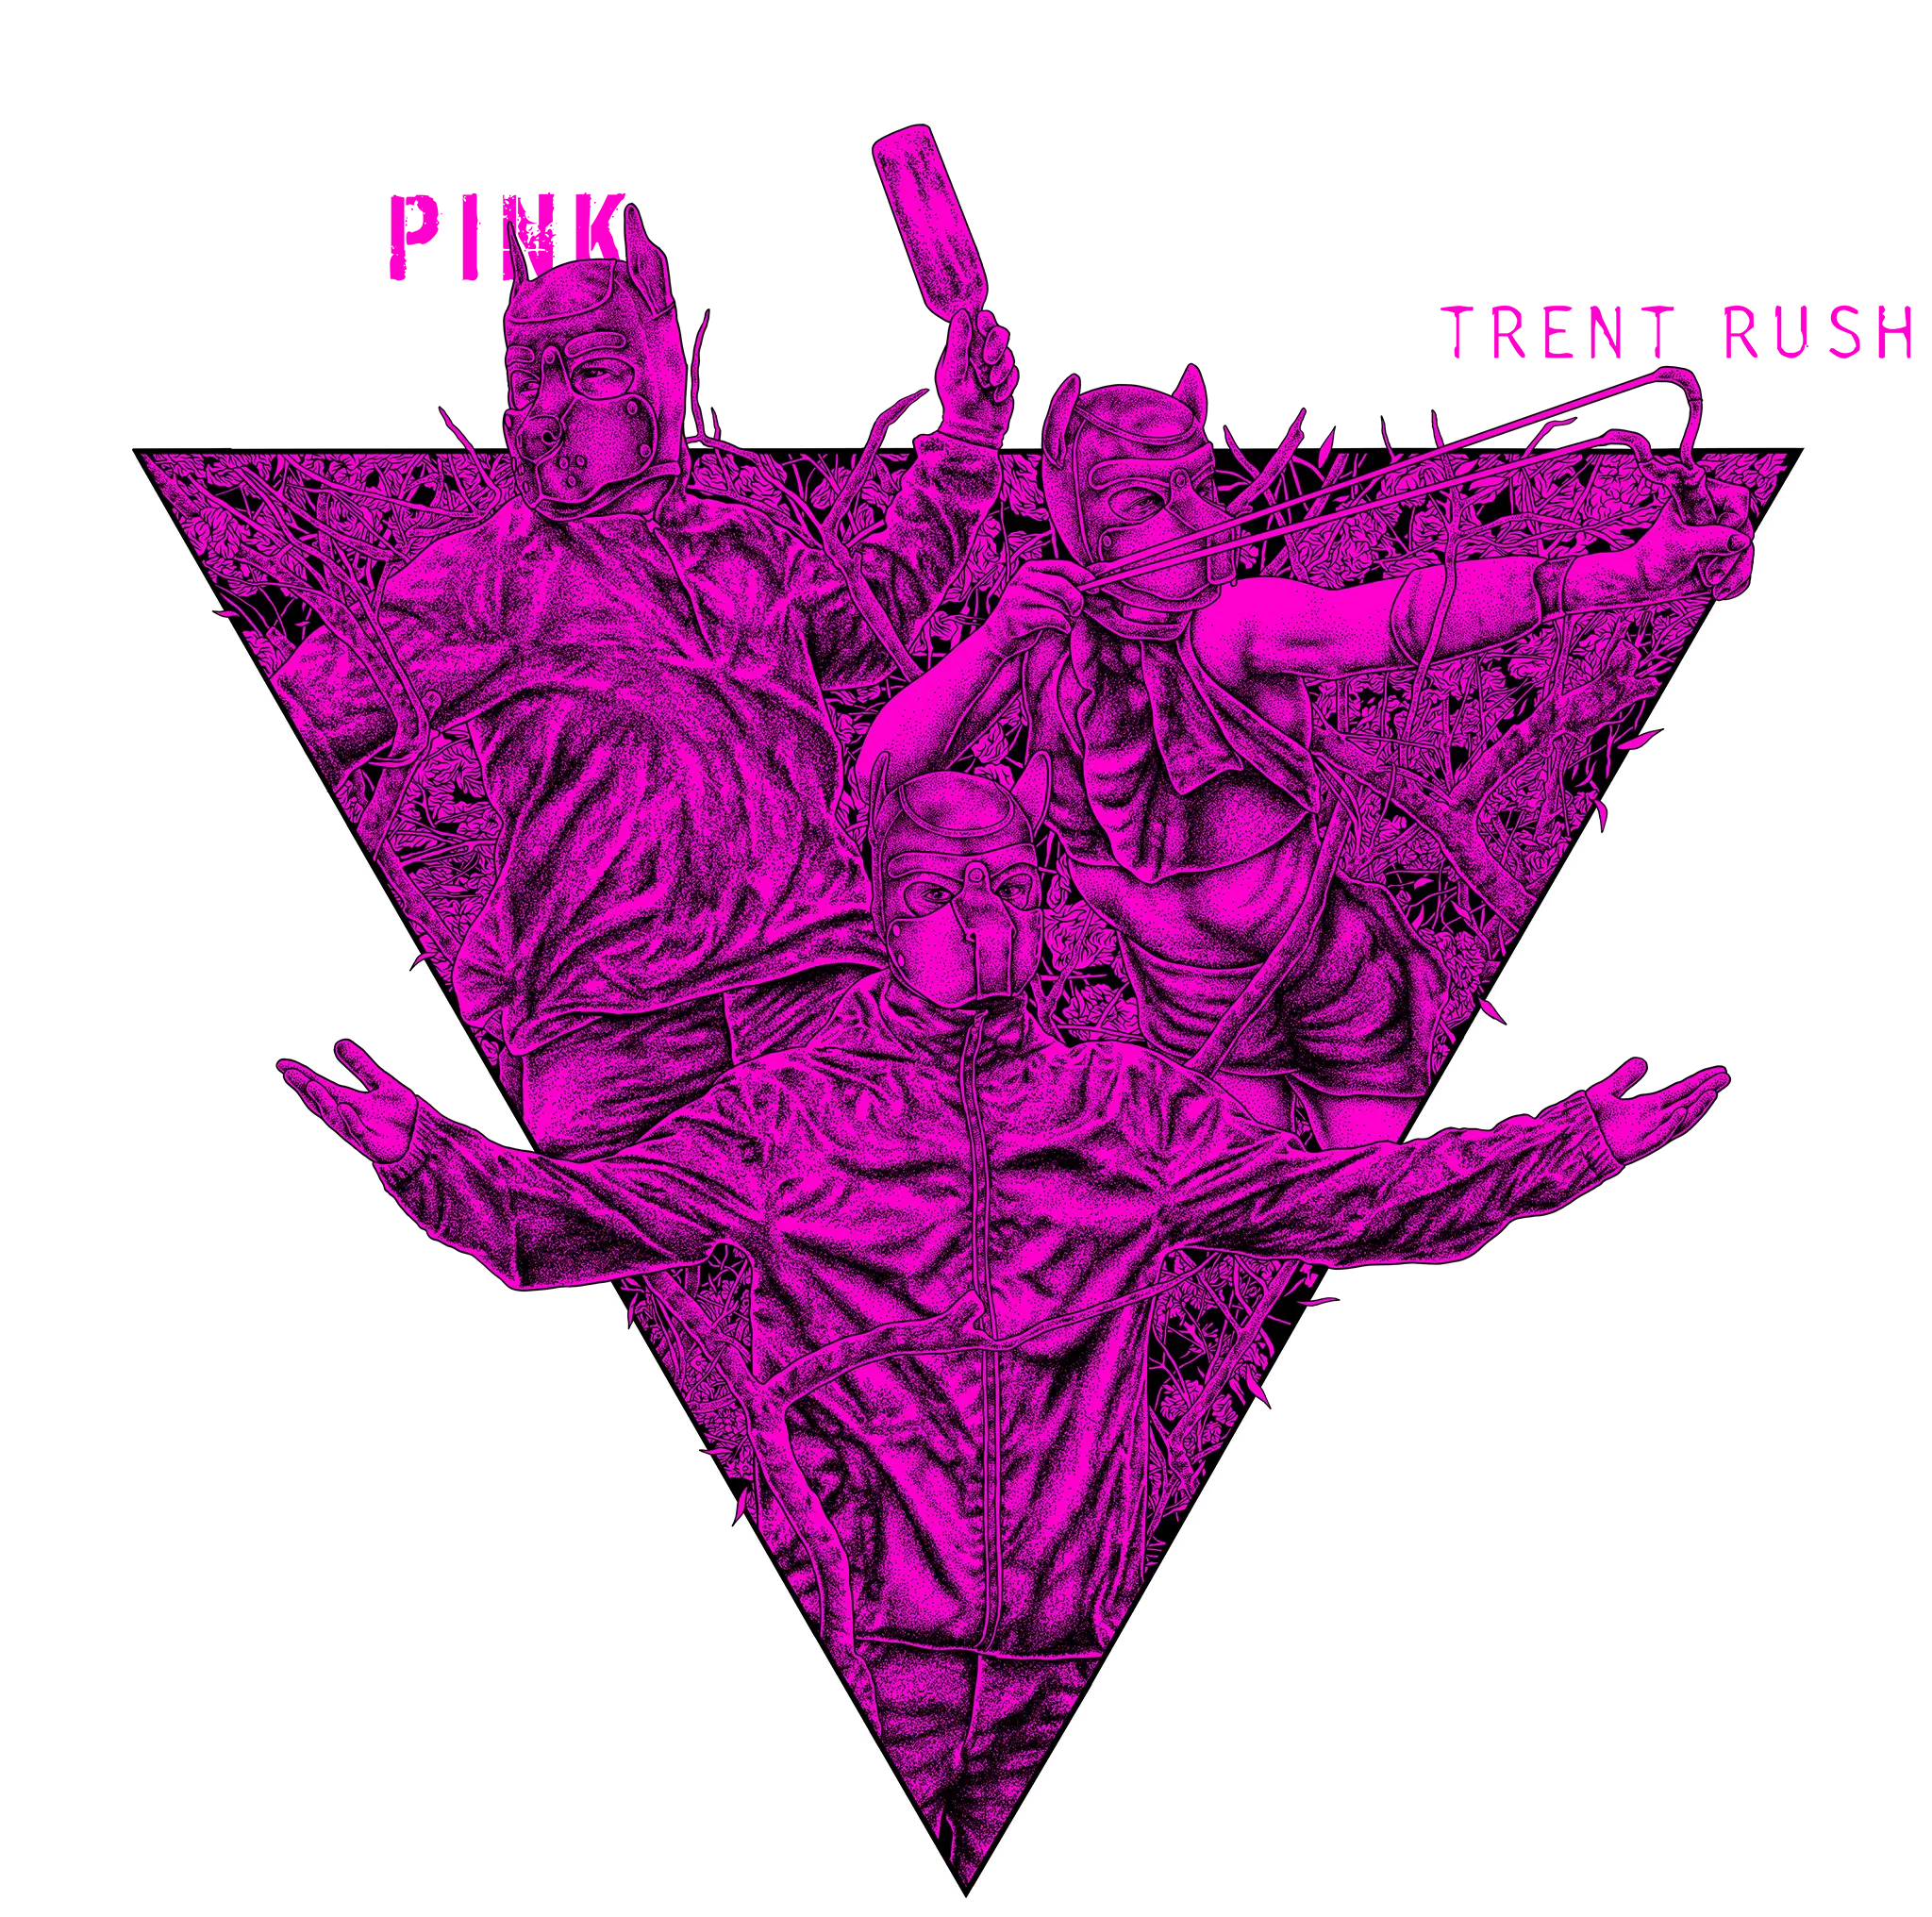 Dog Park Dissidents - The Pink and Black Tour 2023 with Trent Rush